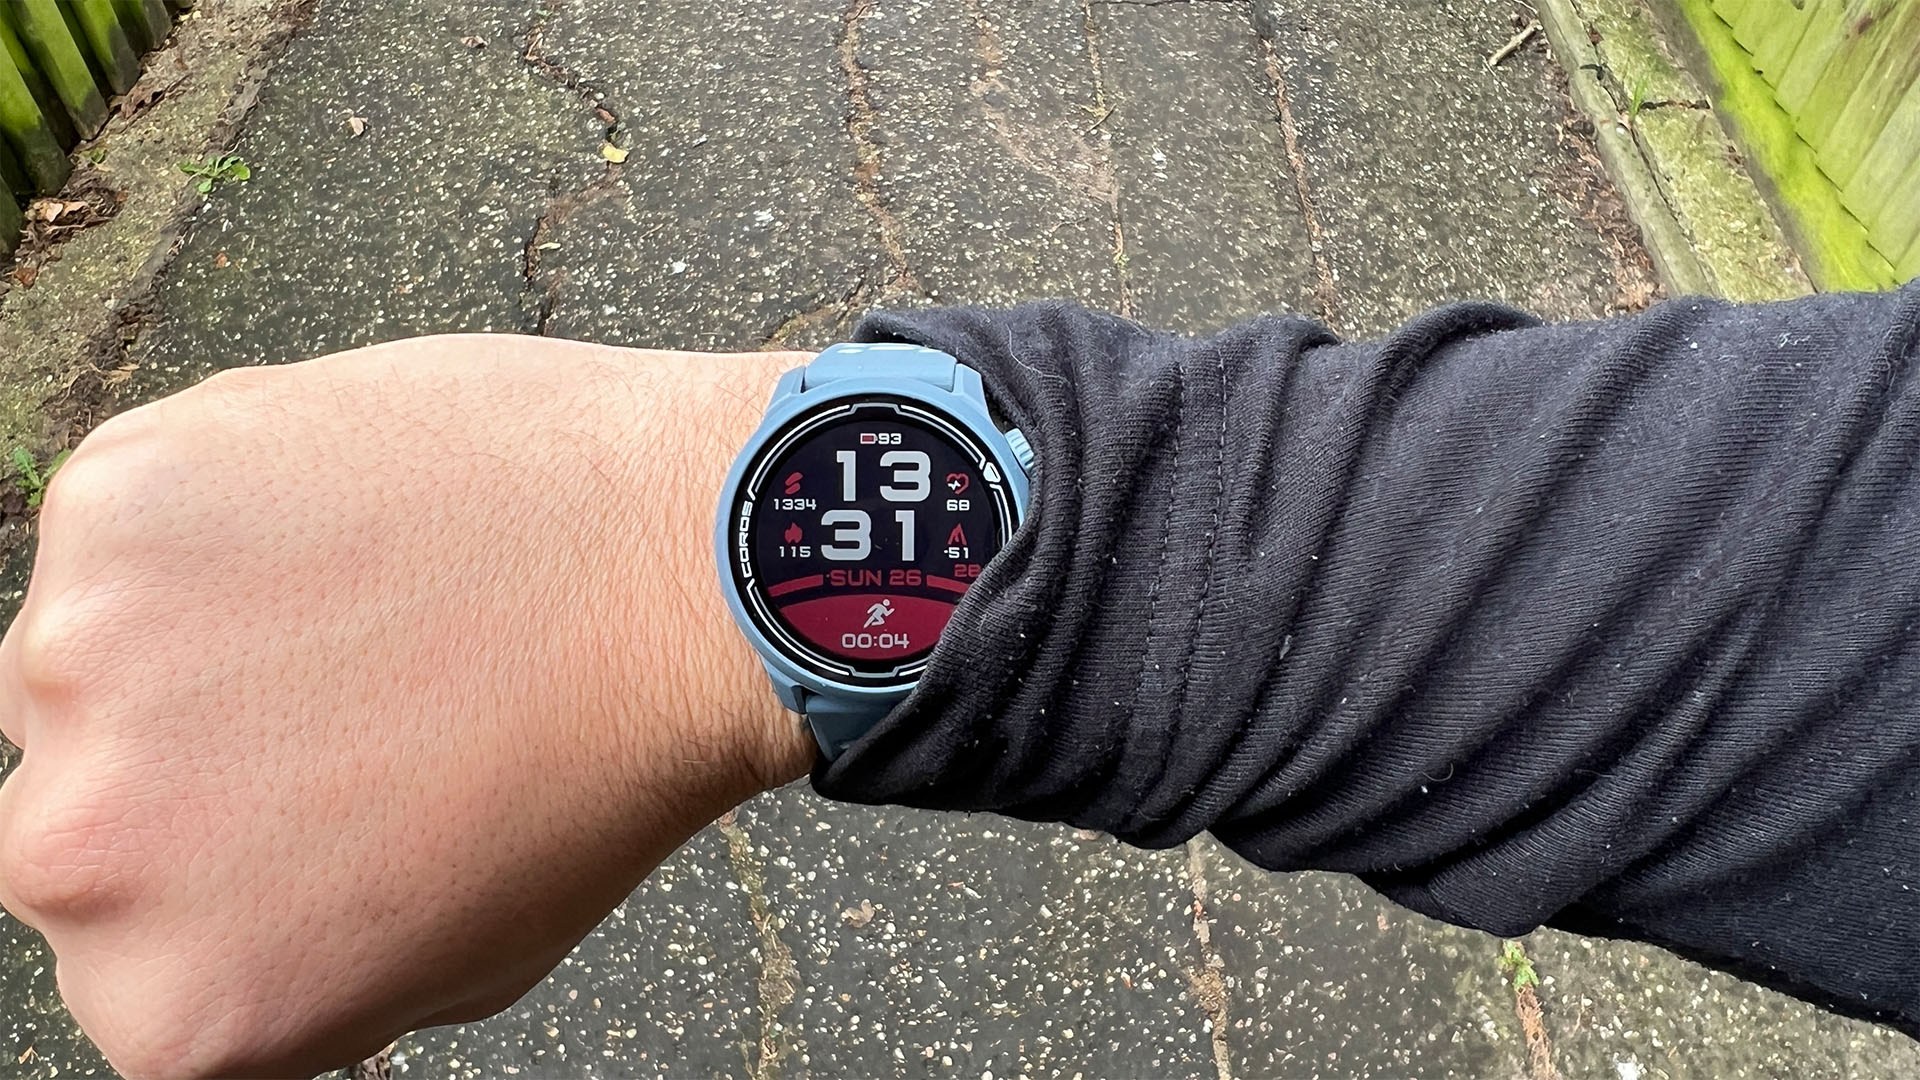 COROS Pace 2 Review: a budget-friendly GPS runners watch!